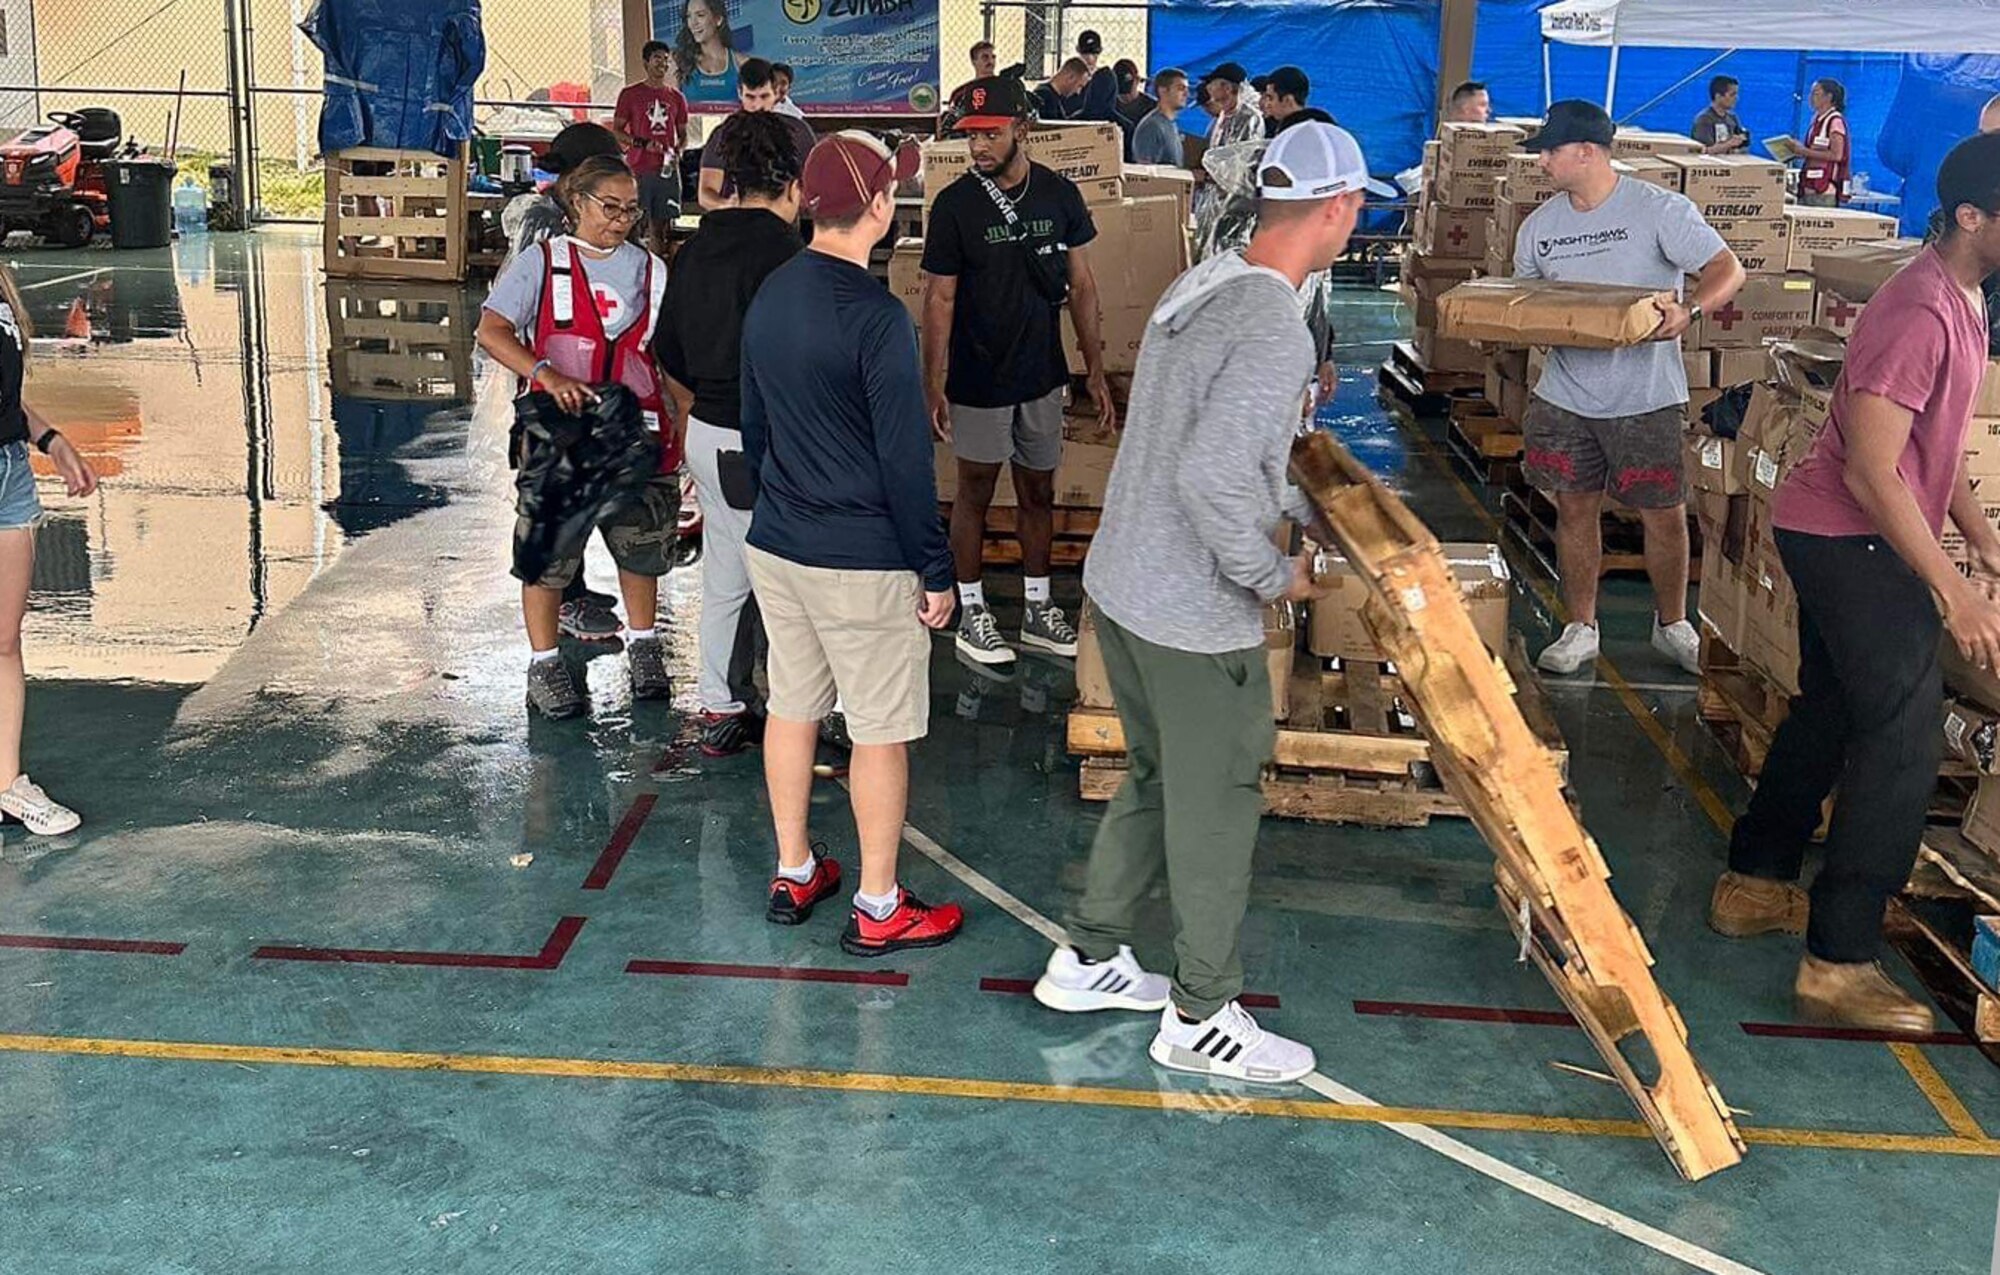 U.S. Air Force Tech. Sgt. Mark Eastman, third from right, 51st Logistics Readiness Squadron fuels distribution NCOIC, moves a pallet in Guam during Typhoon Mawar recovery operations near Andersen Air Force Base, Guam. Eastman and his team assisted the Red Cross in delivering aid to remote villages by visiting 1,300 families and distributing over 103,000 pounds of aid. (Courtesy photo)